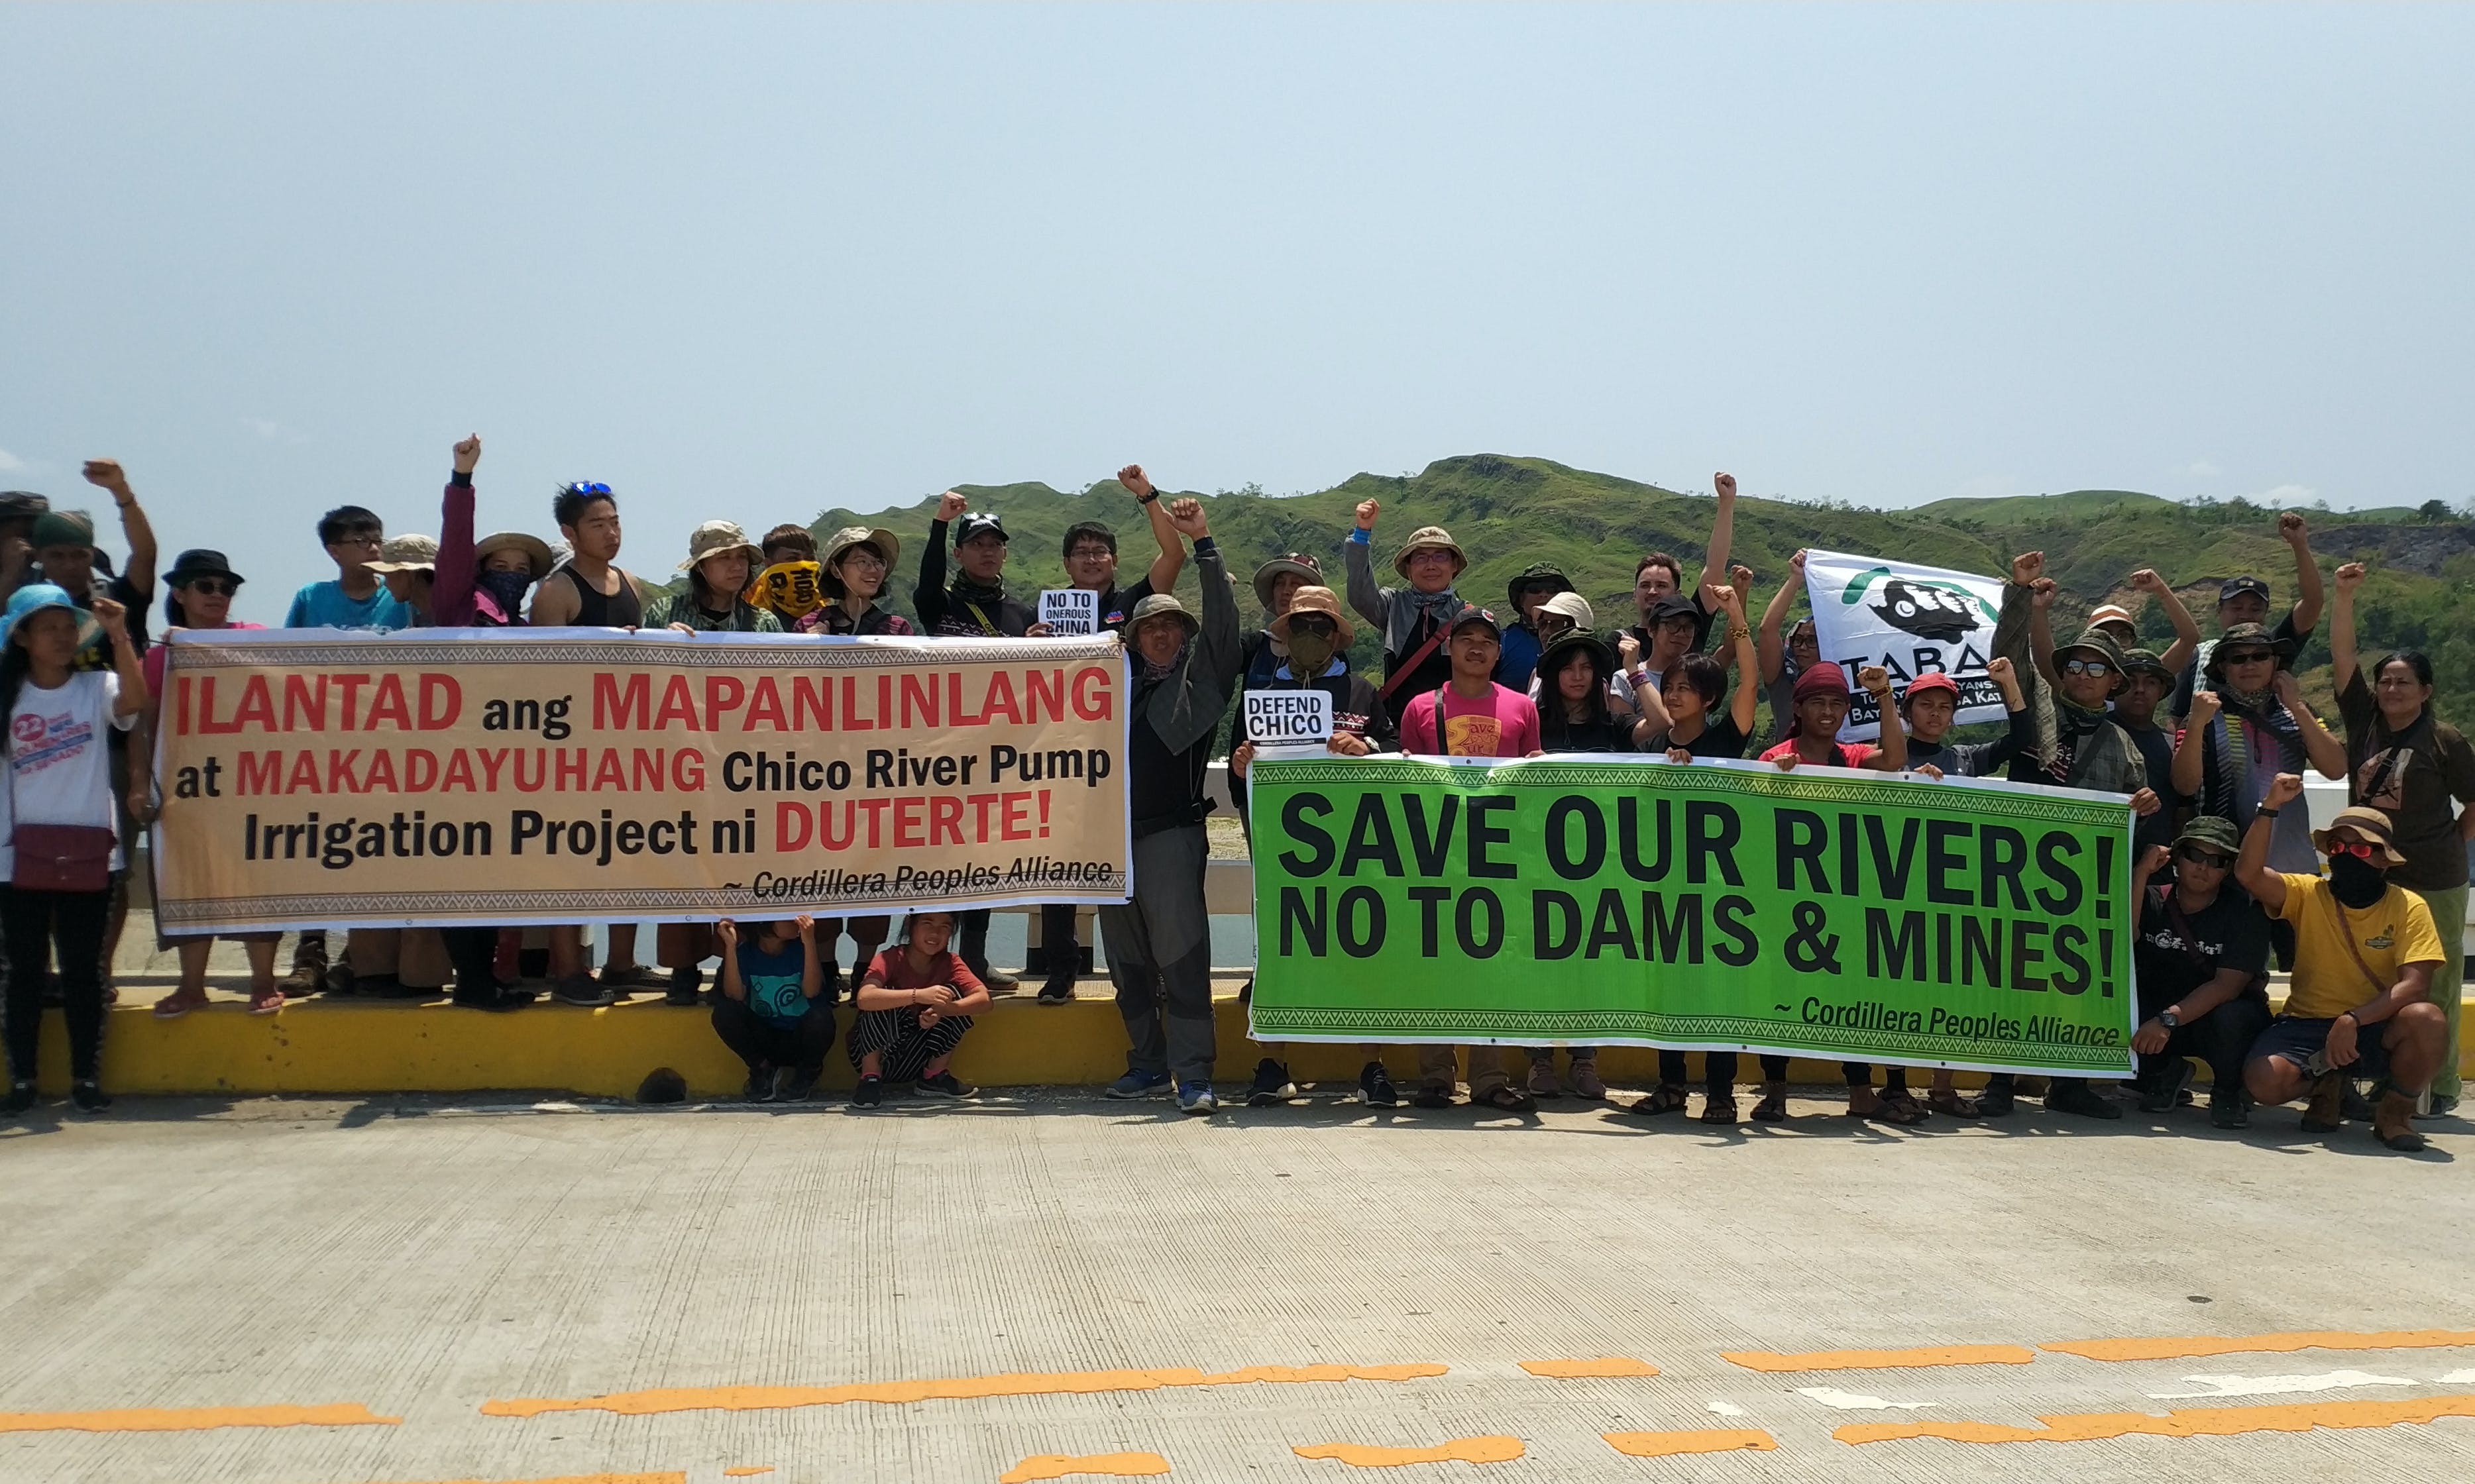 Taiwan and Philippines Indigenous Groups Find Solidarity in Opposing China